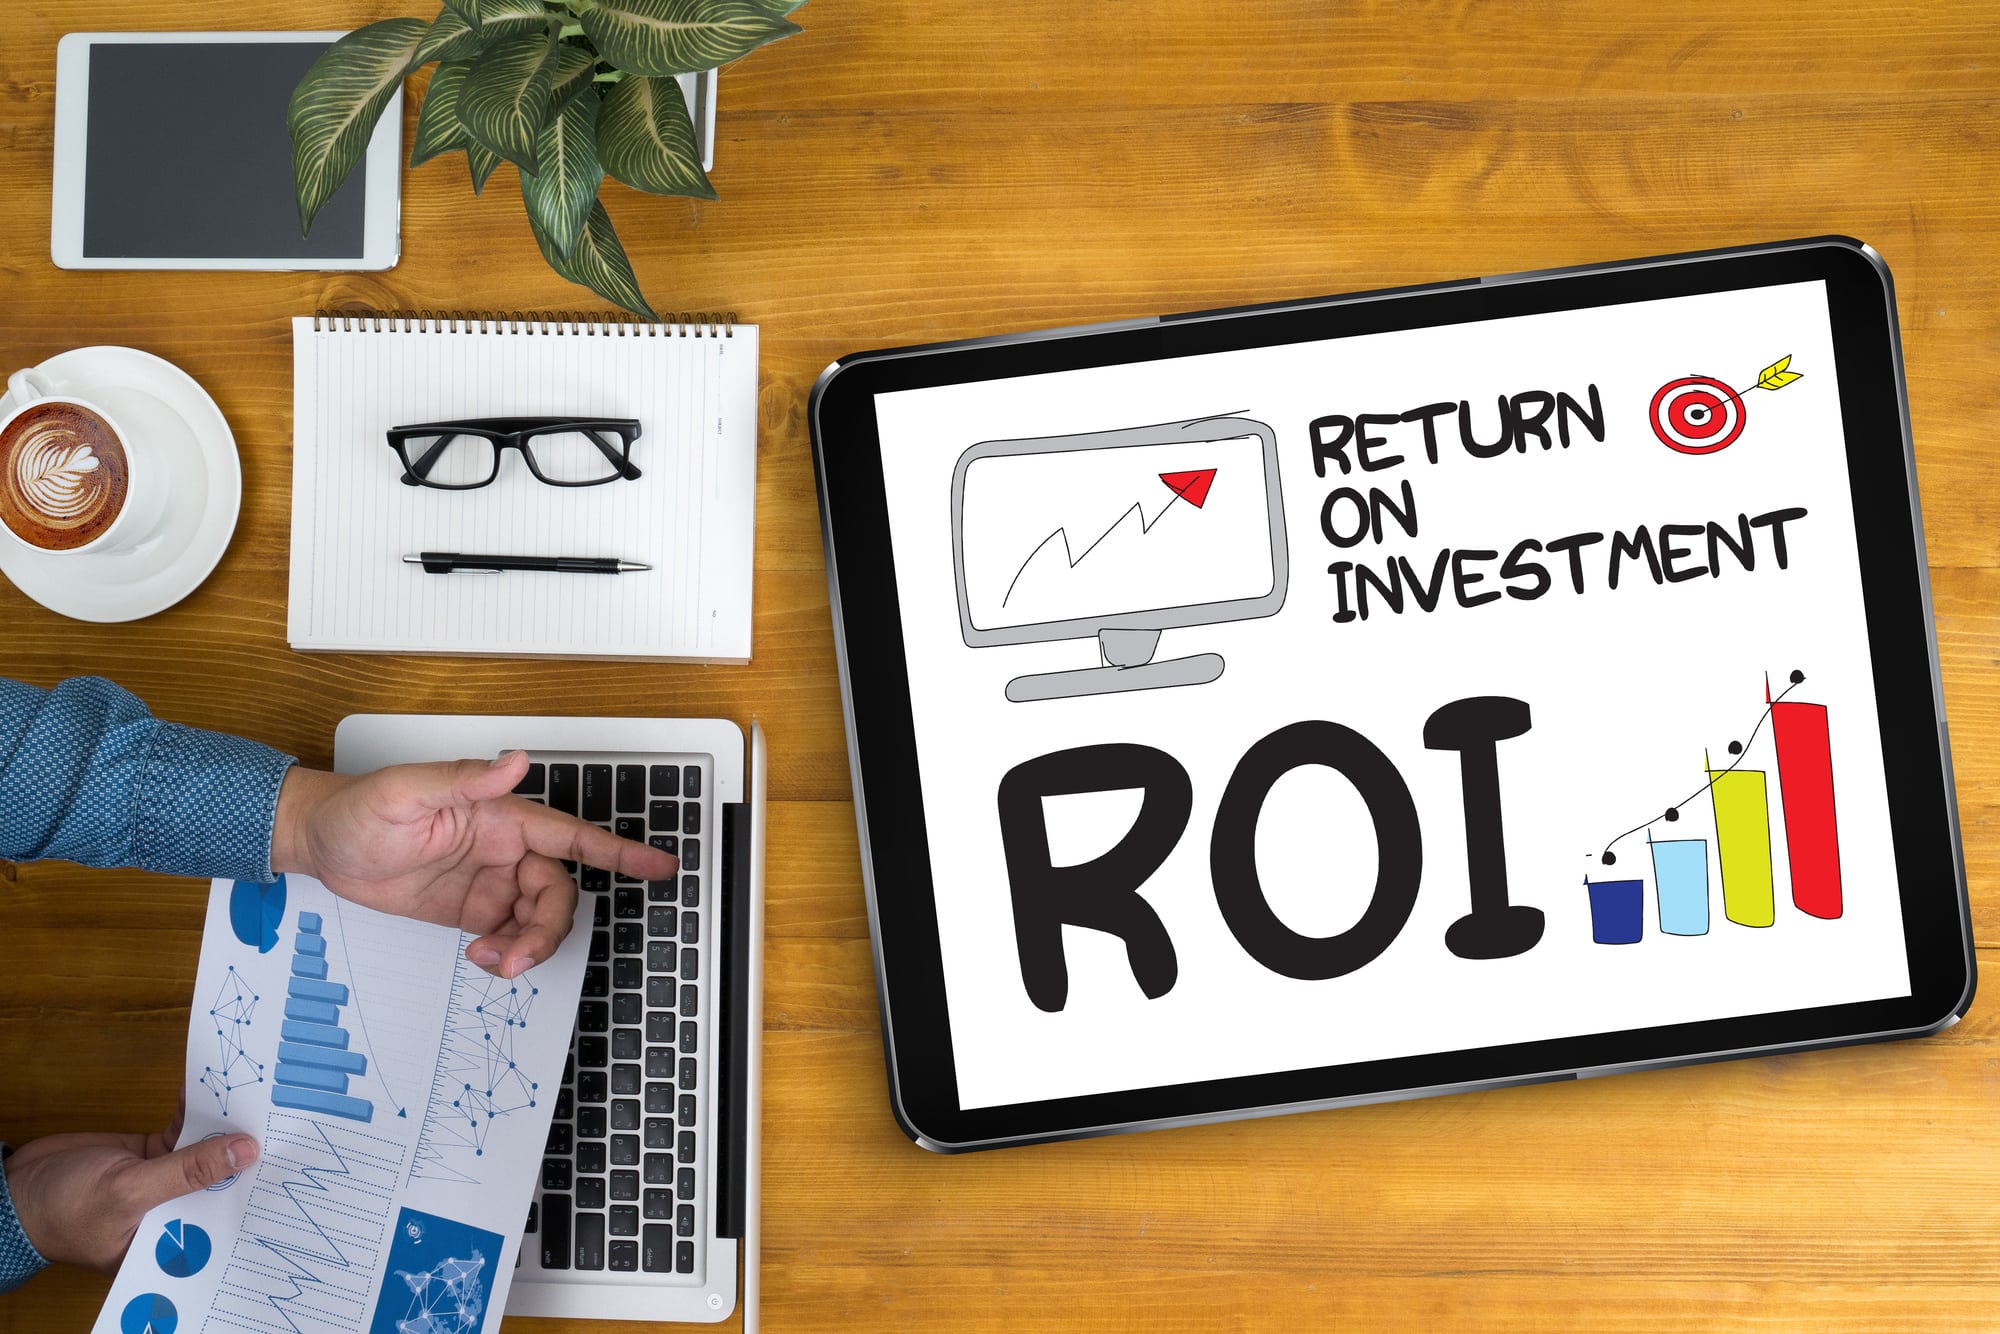 How To Invest Smartly: Maximize Your Returns!